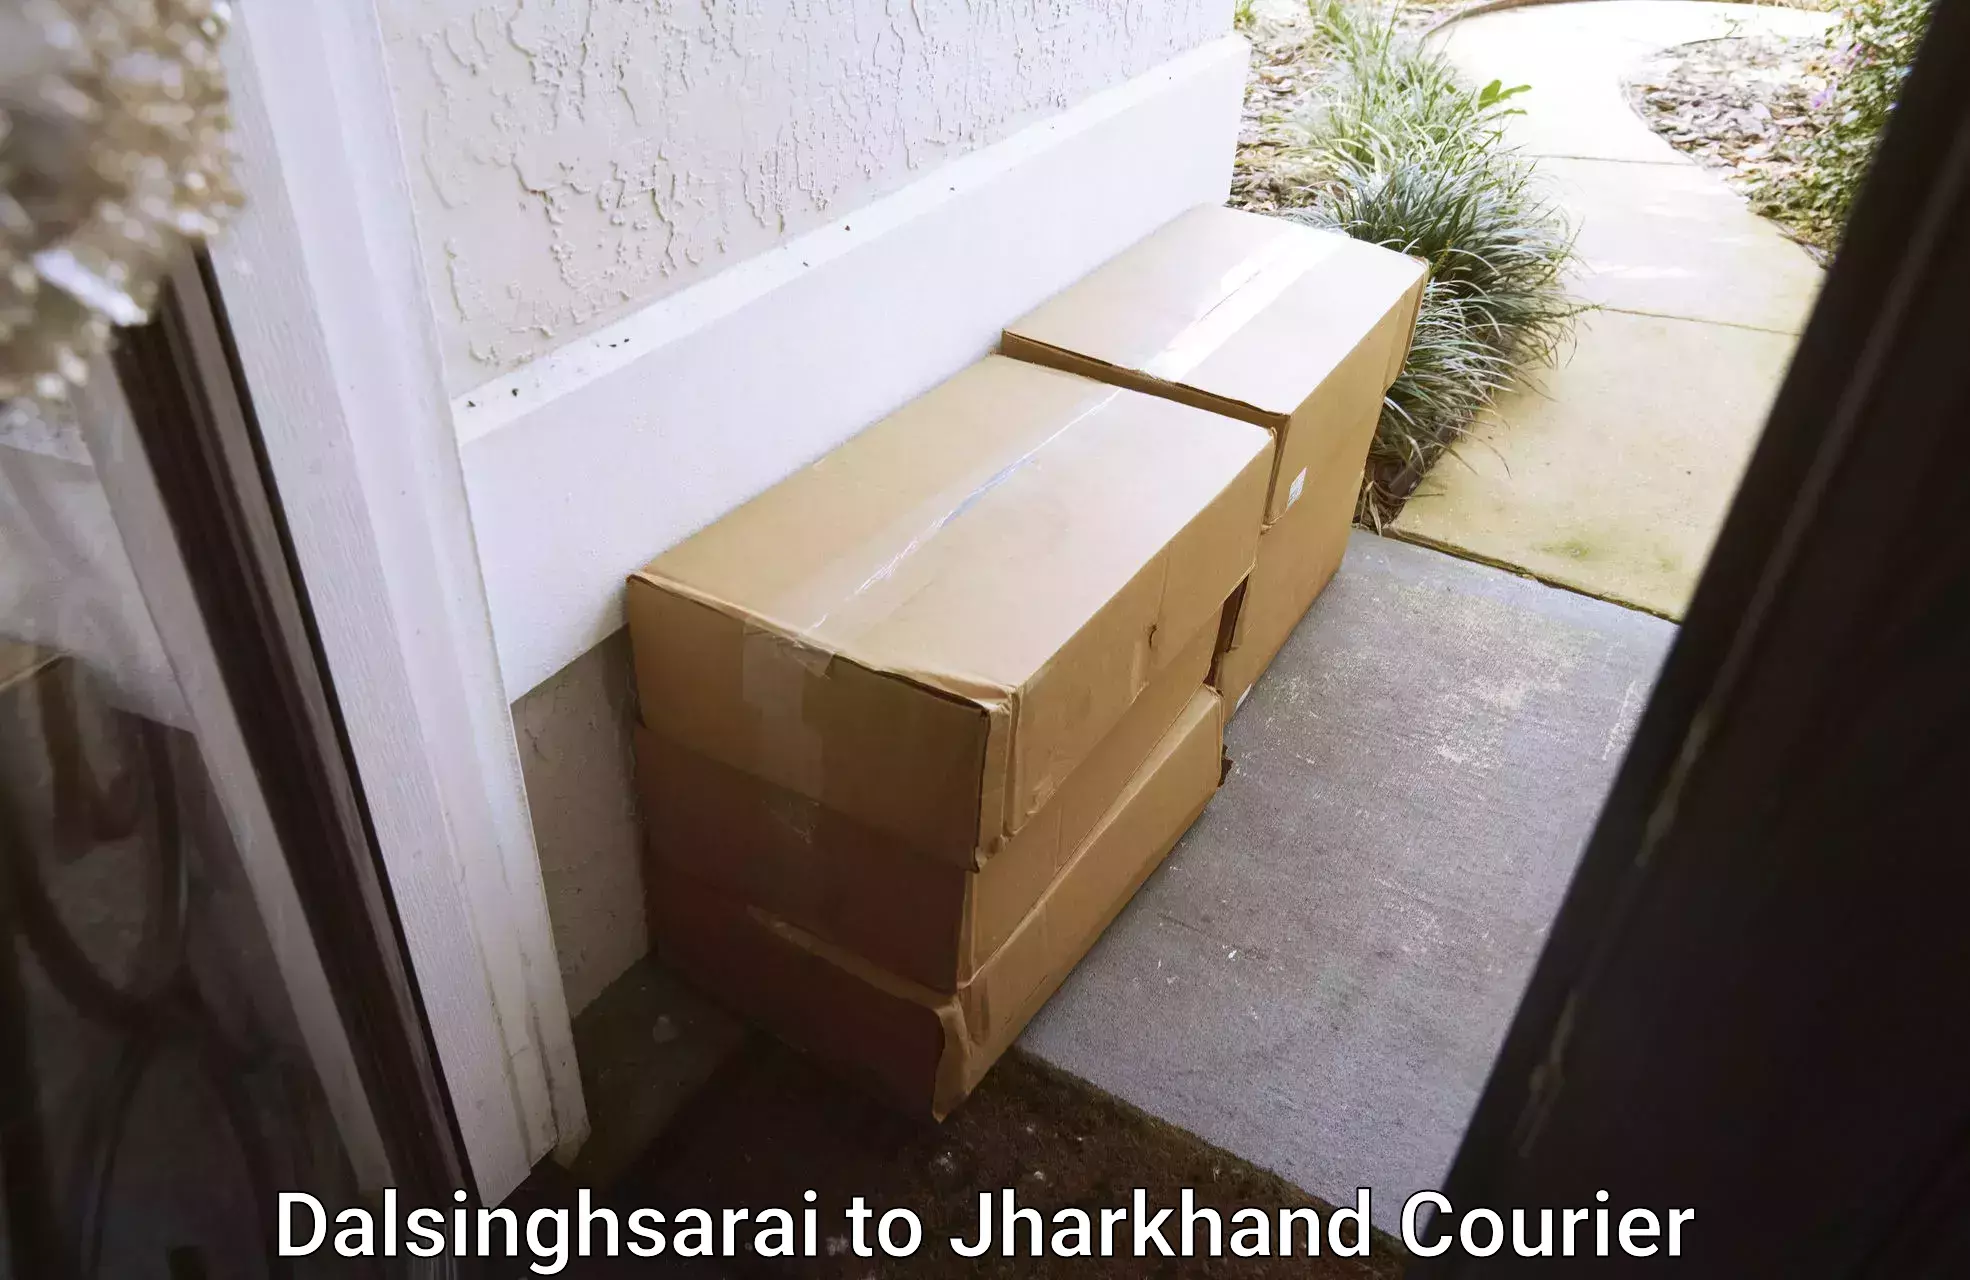 Expert moving and storage Dalsinghsarai to Jharkhand